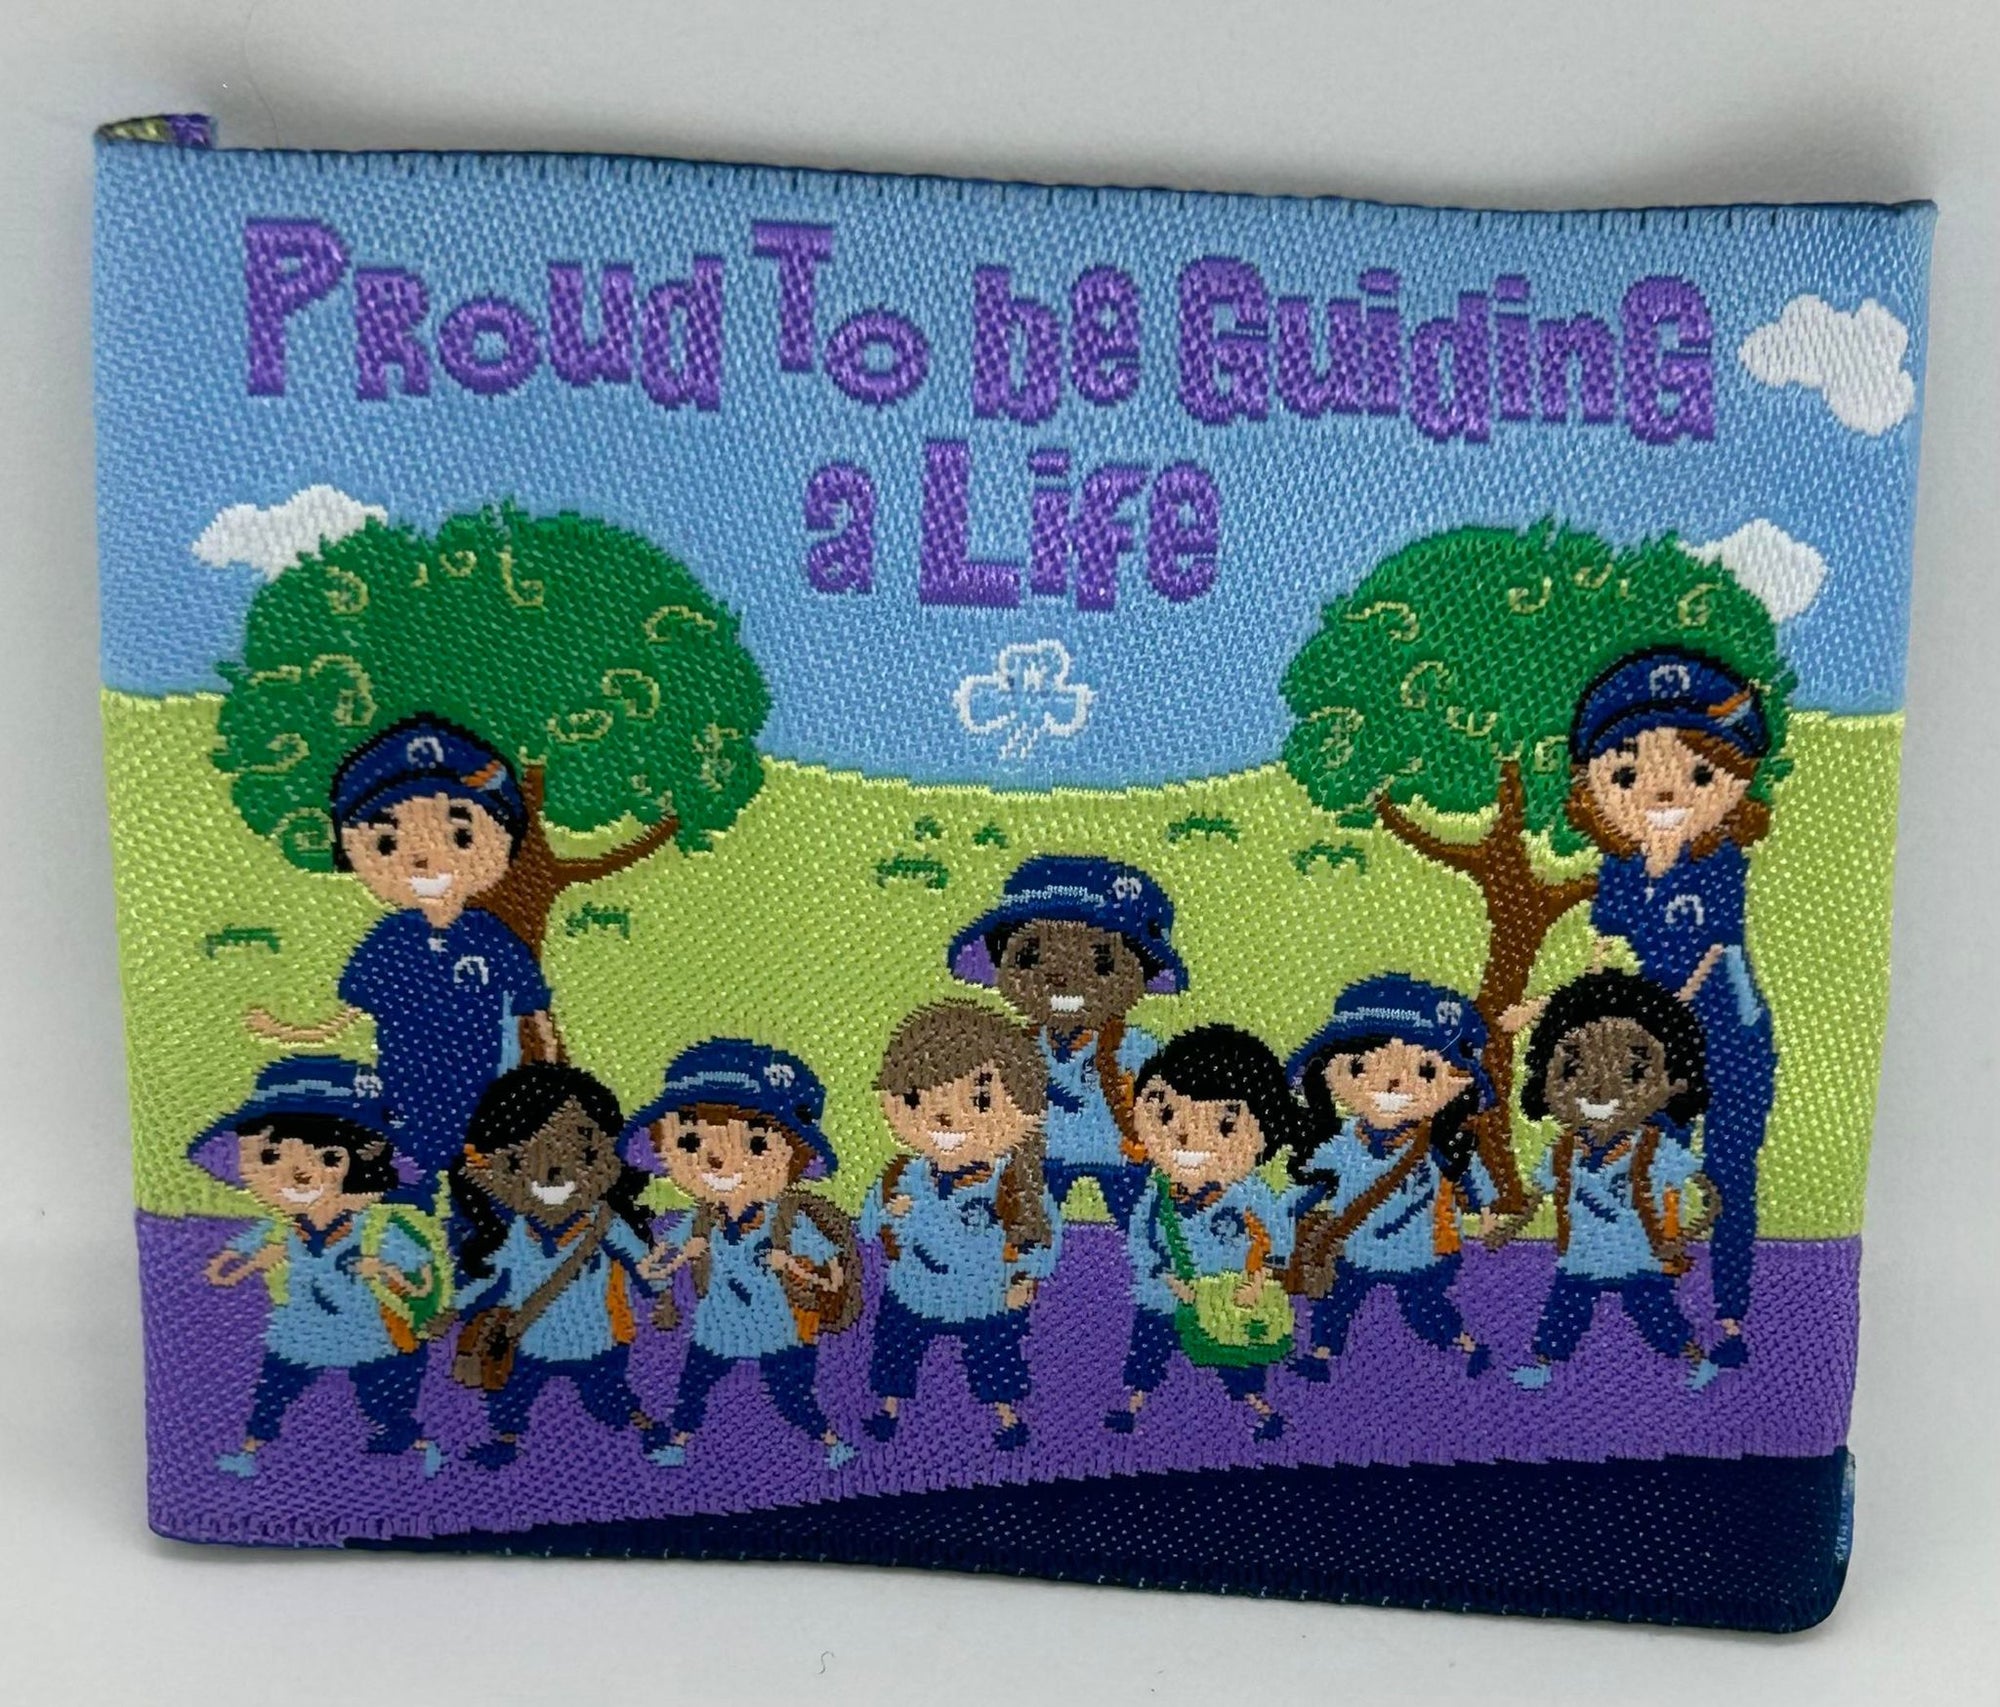 a square unbound badge in an outdoor scene with two guide leaders and a guide unit